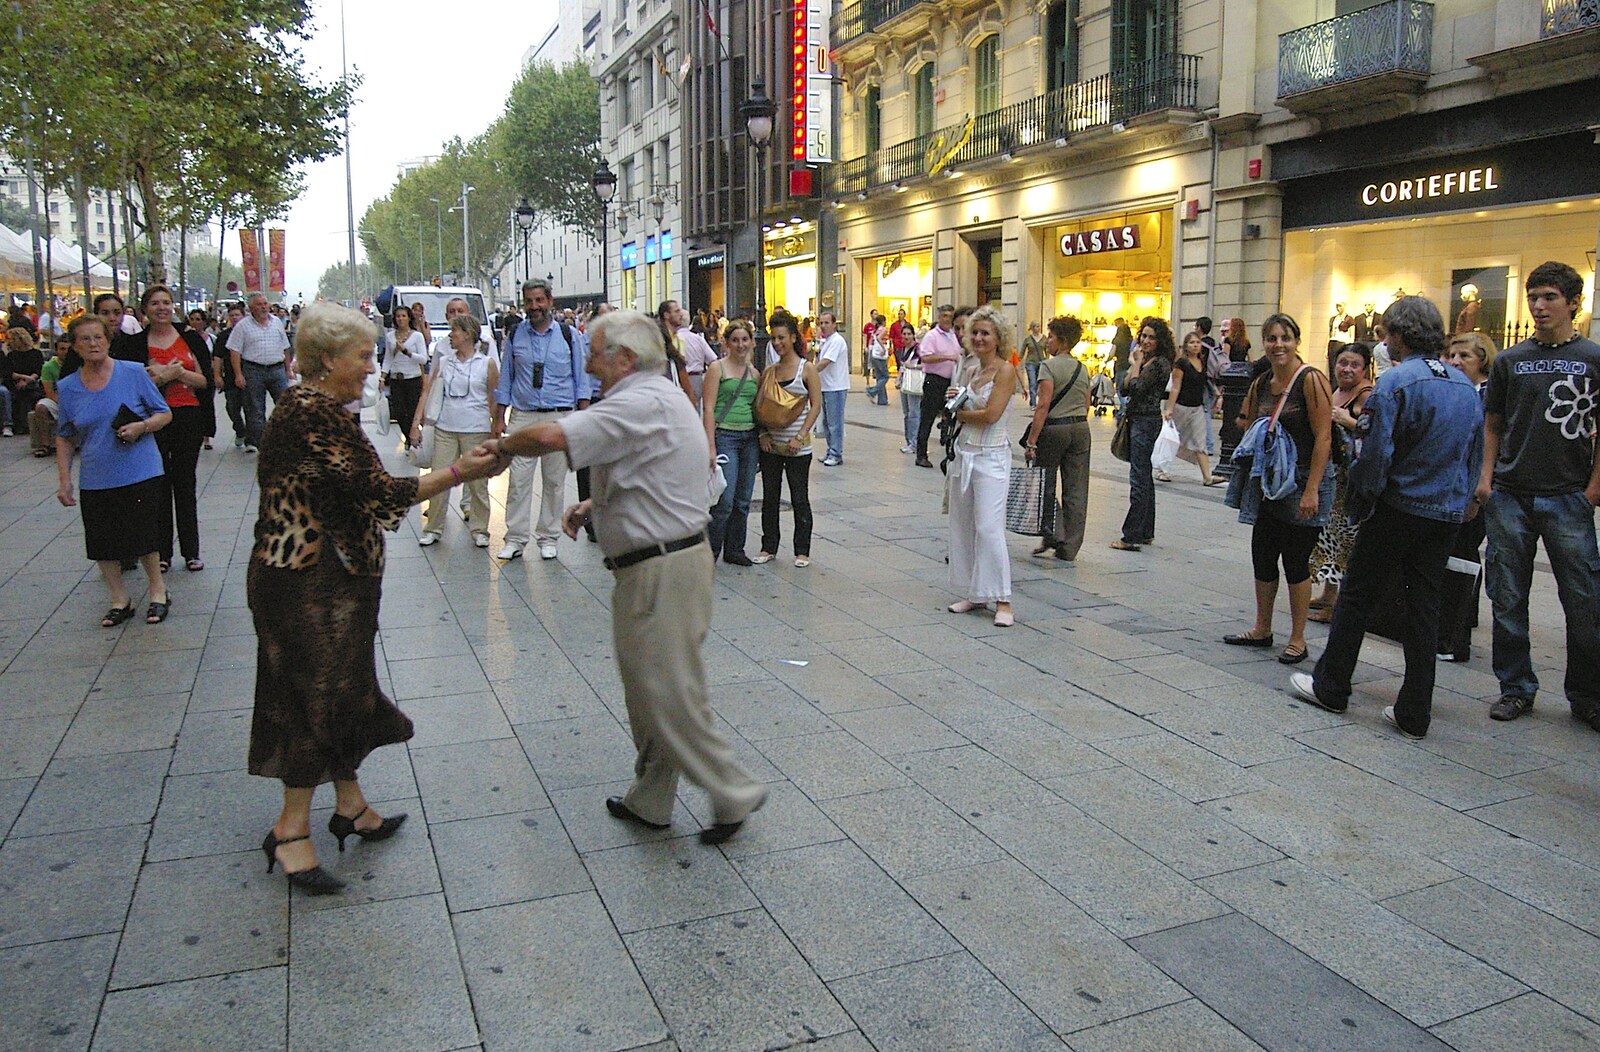 An old couple dance in the street from Two Days in Barcelona, Catalunya, Spain - 22nd September 2006